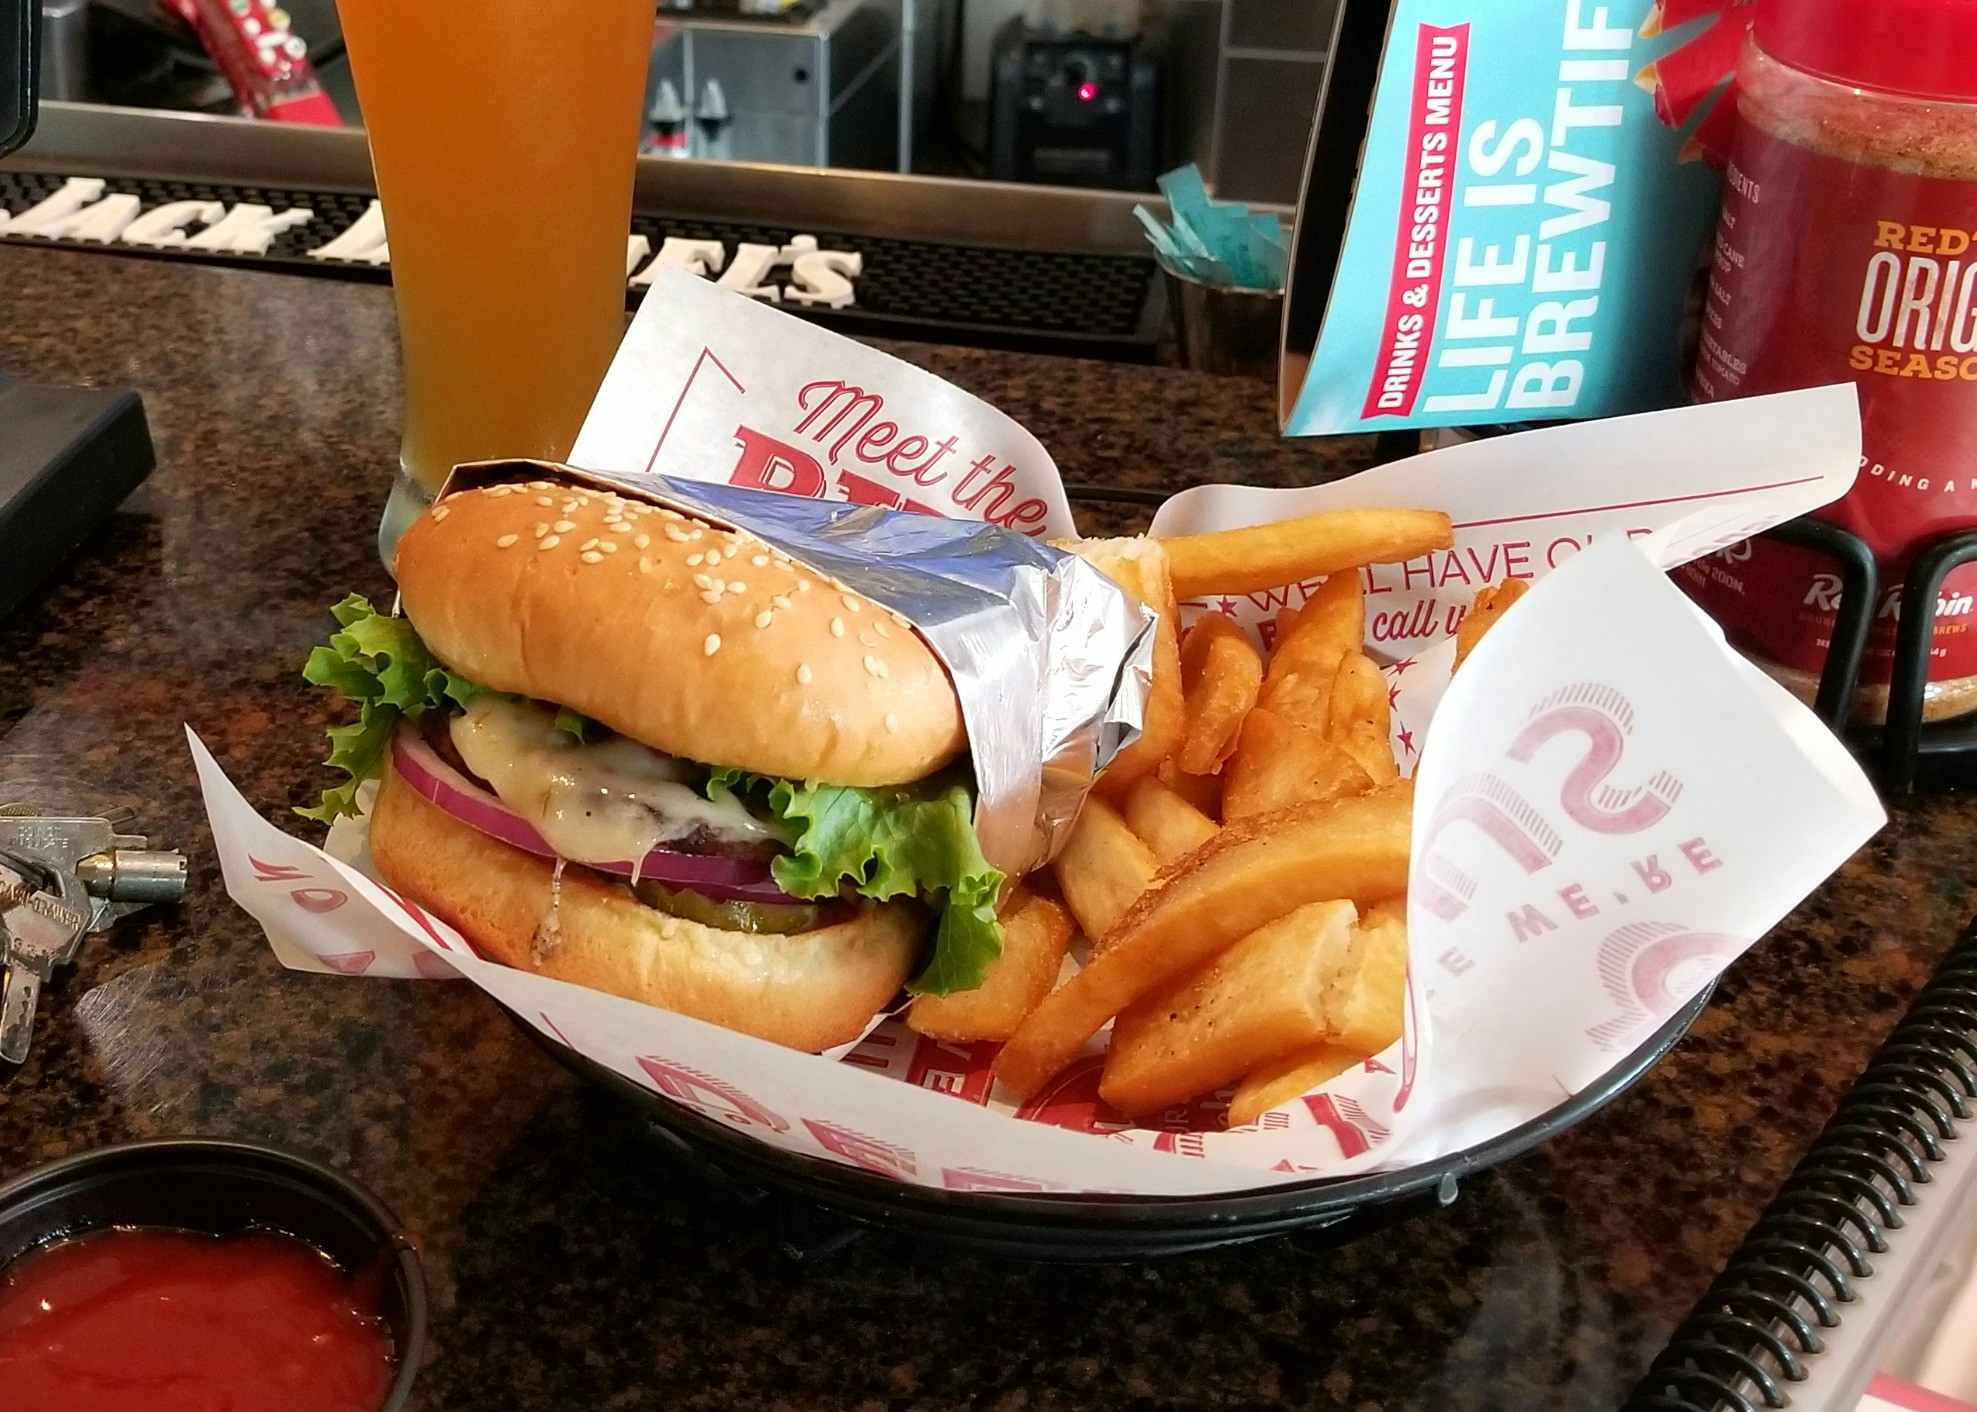 Sign up to be a Red Robin Royalty member and get all the freebies for Royalty Customer Appreciation Week.